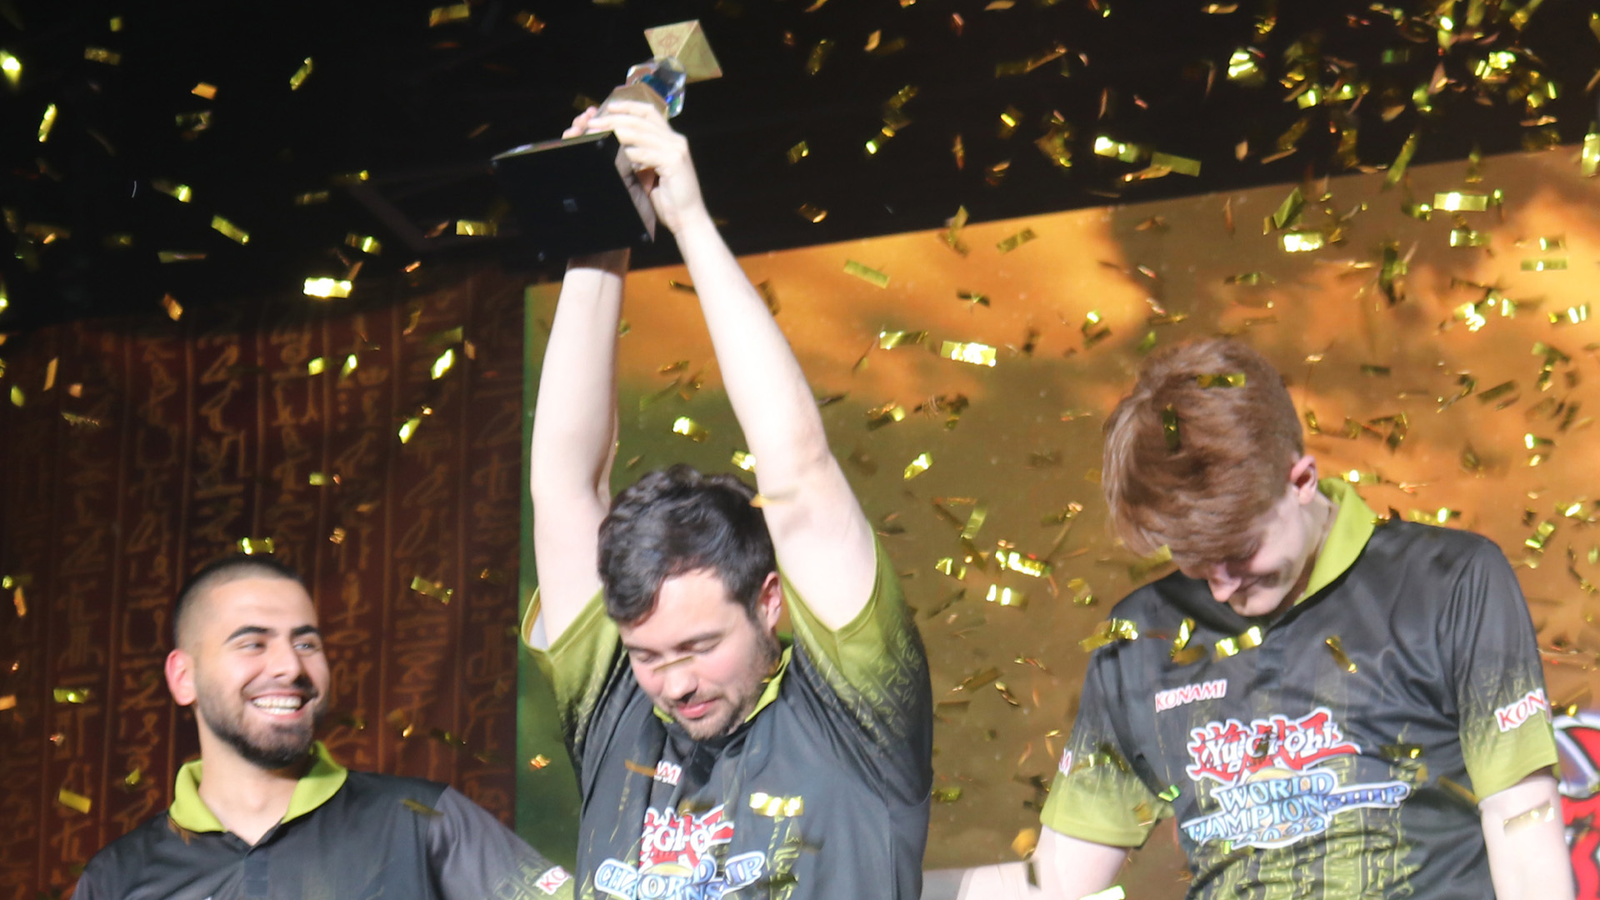 League of Legends Worlds 2023: The 7 champions who could dominate the  metagame